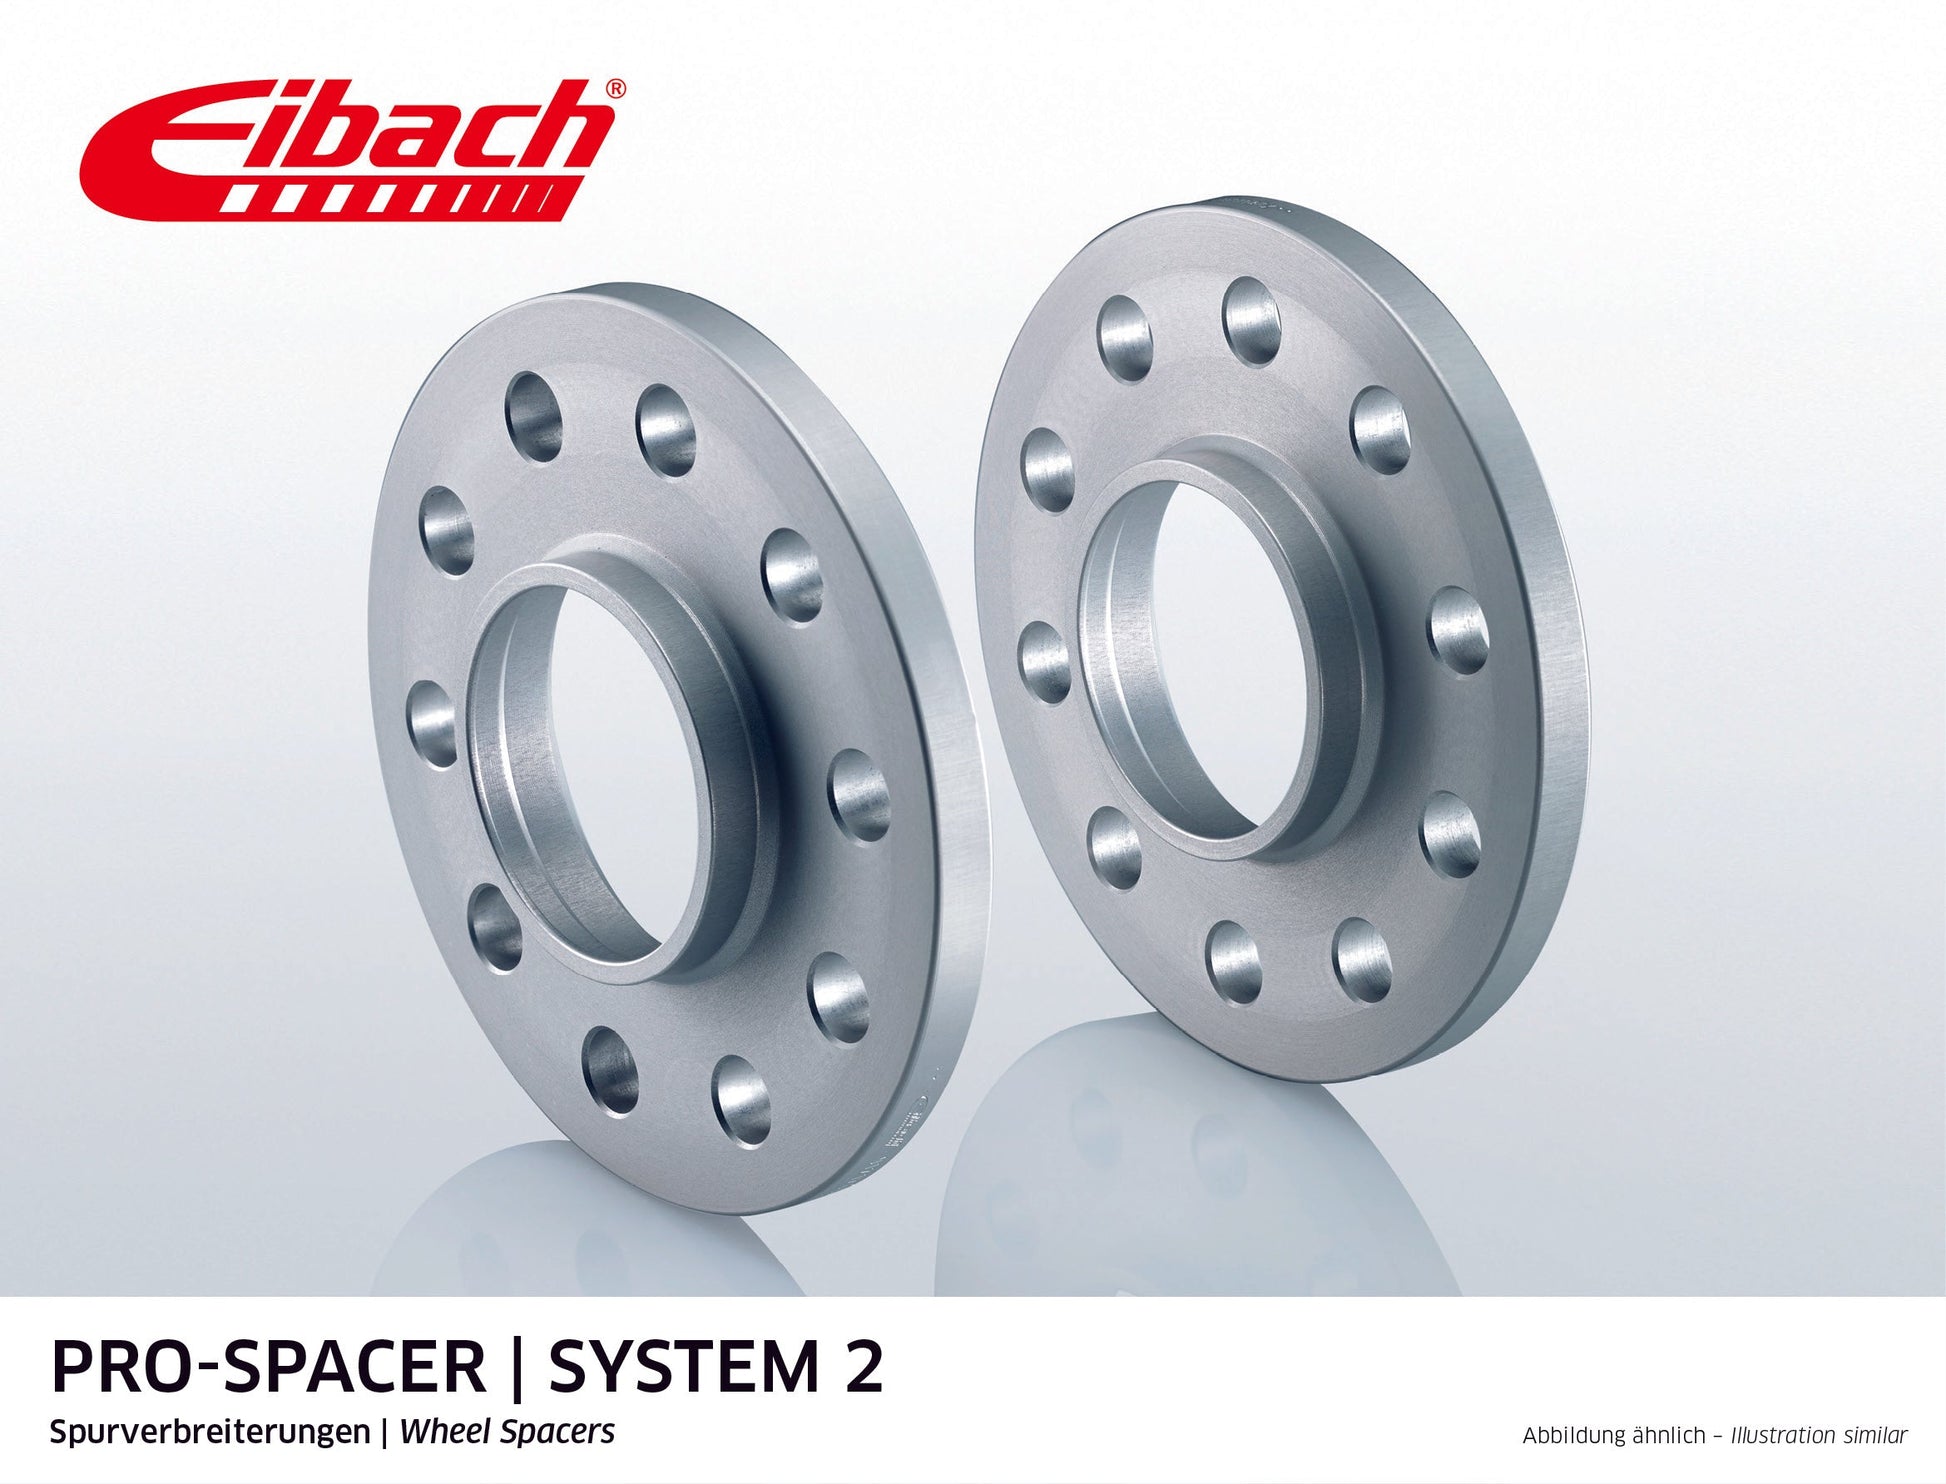 Eibach Pro-Spacer Kit (Pair Of Spacers) 20mm Per Spacer (System 2) S90-2-20-036 (Silver) at £127.67